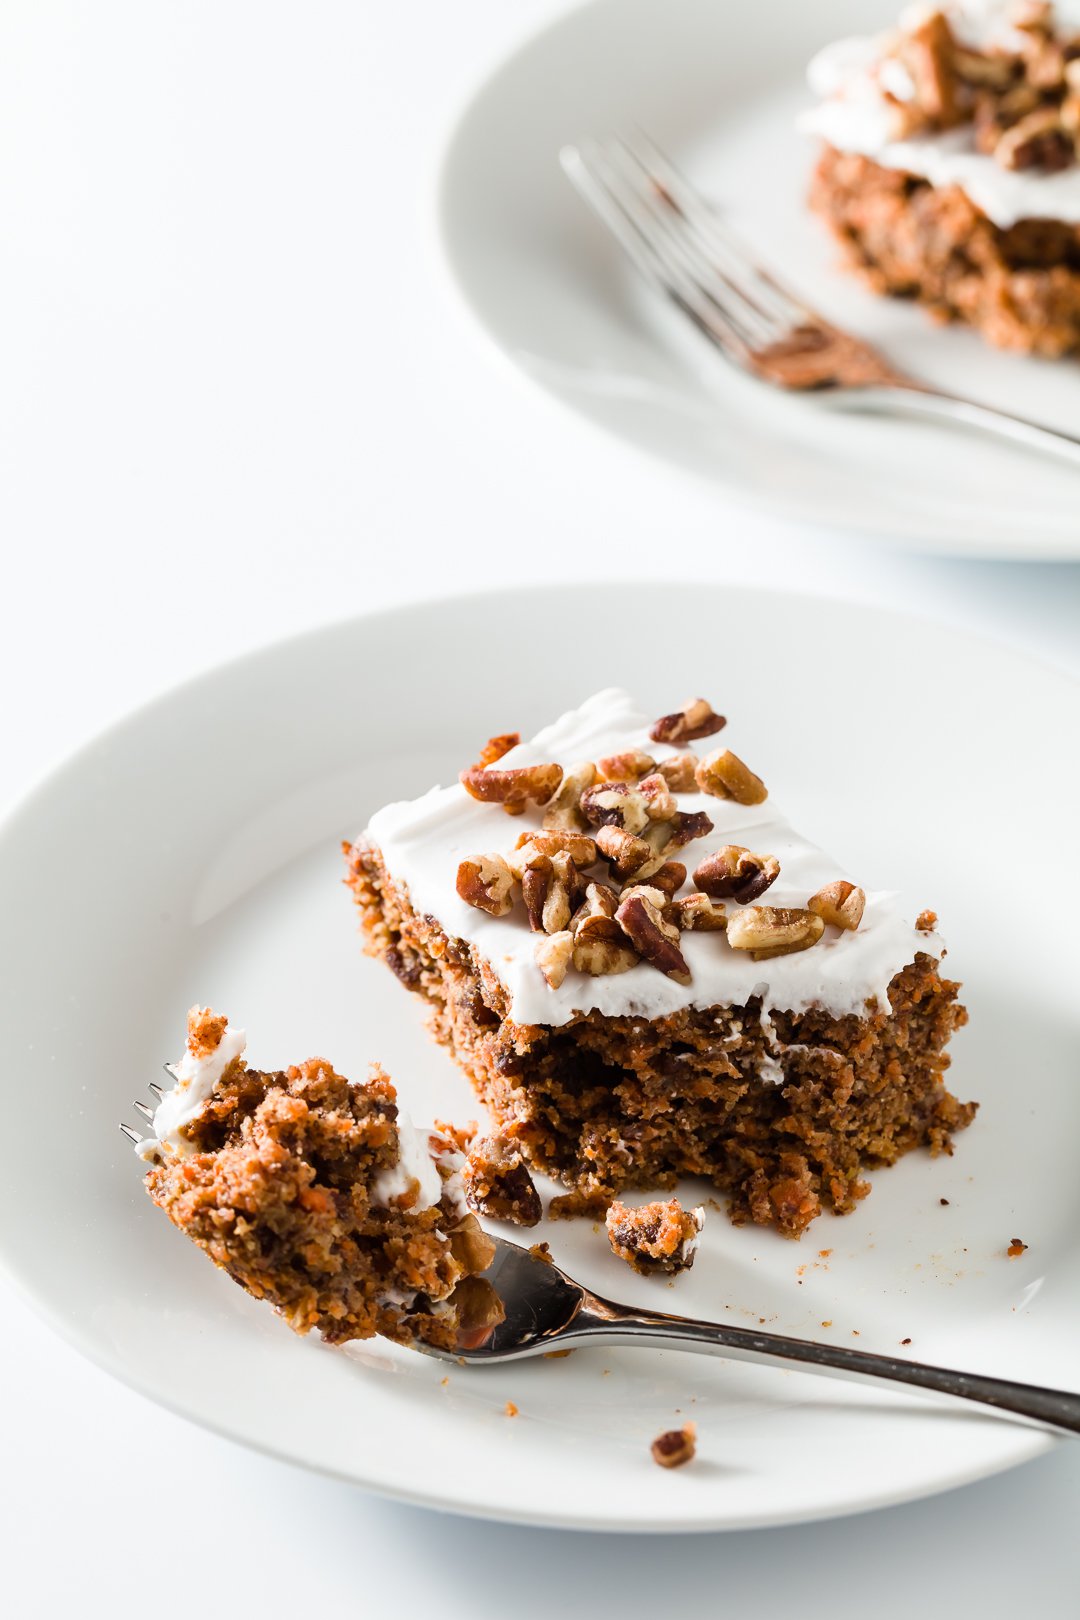 Piece of healthy carrot cake with a bite removed